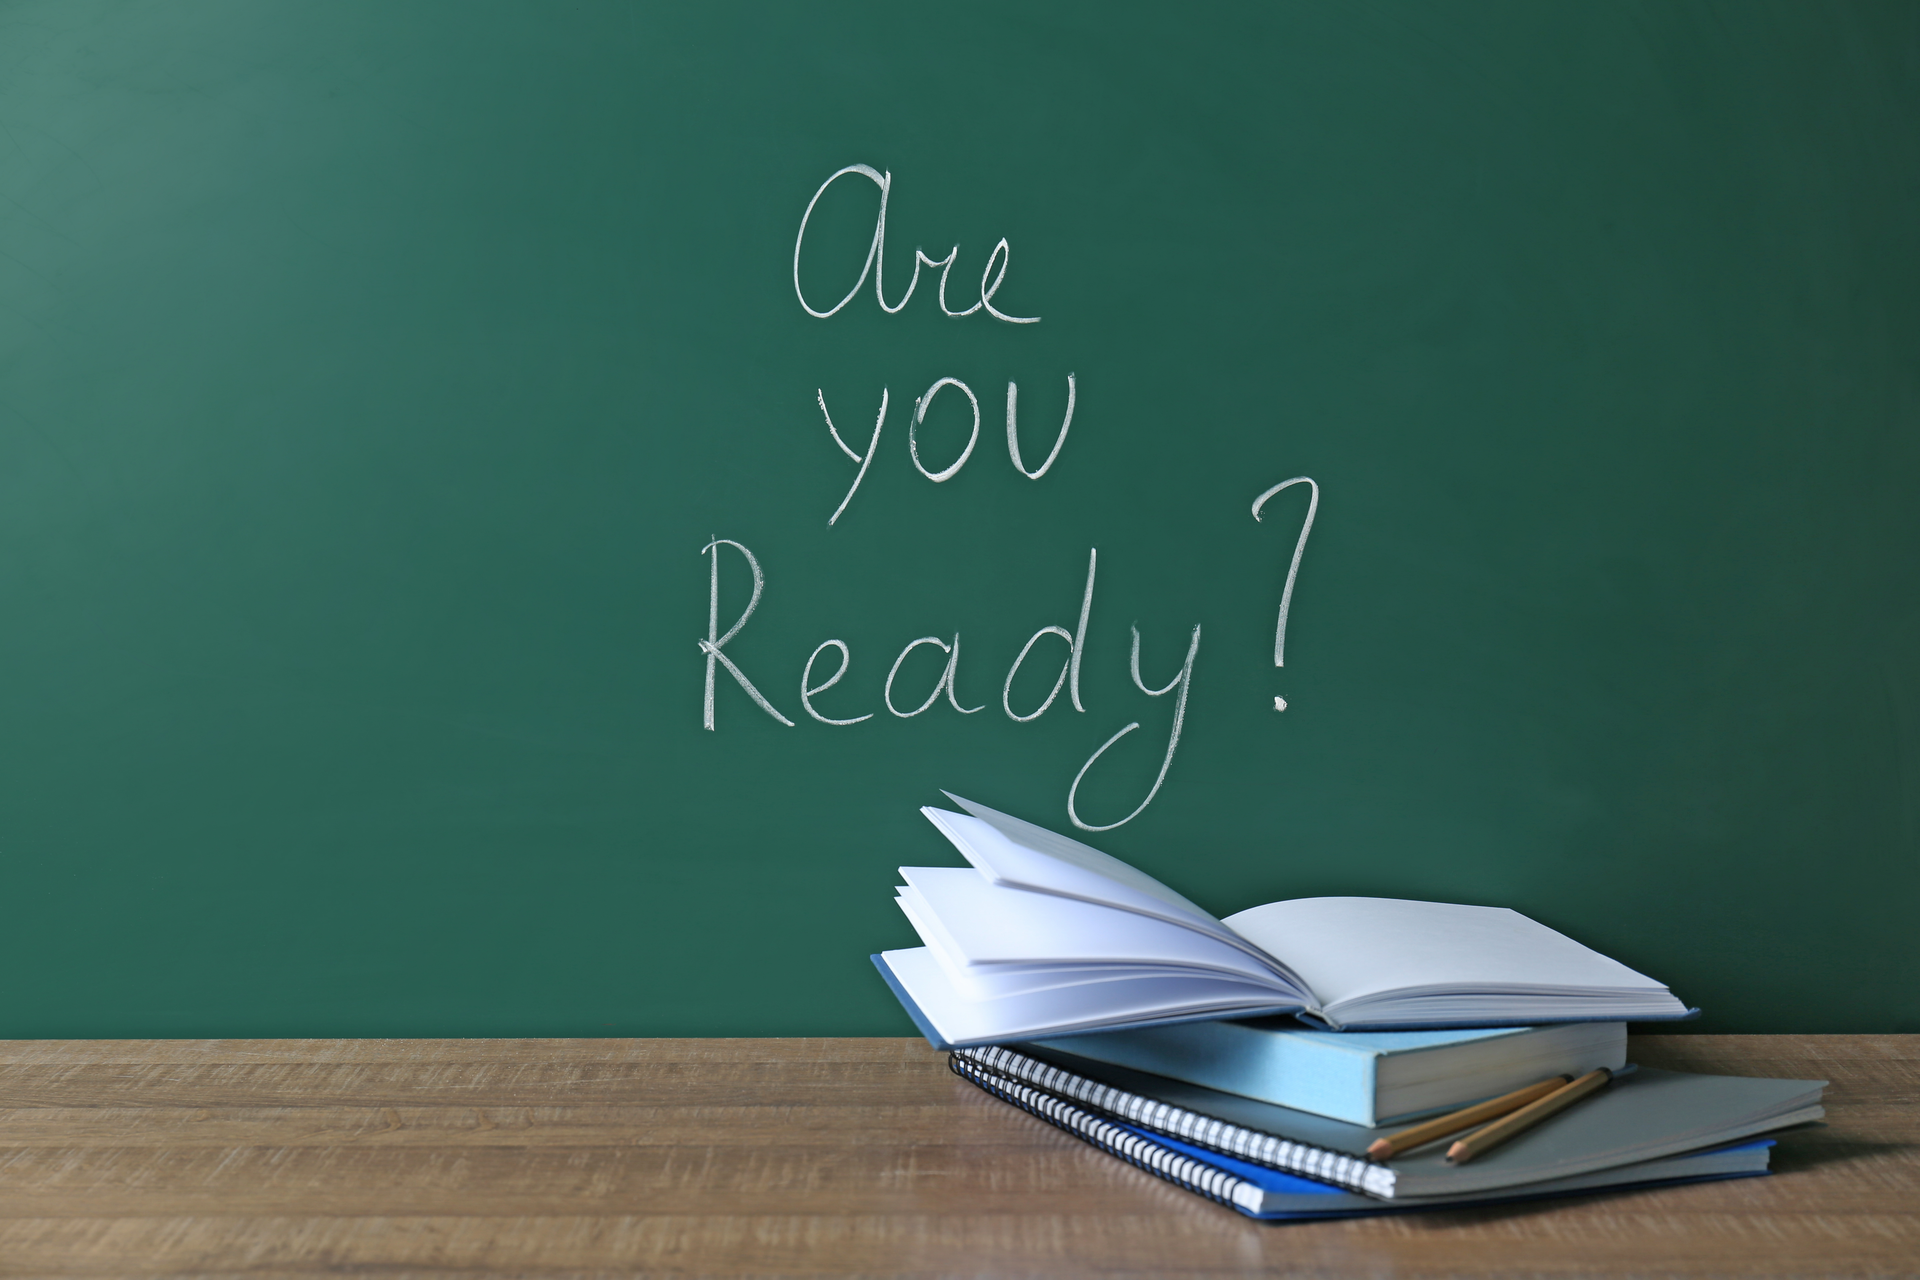 Chalkboard with question "Are you ready?" and notebooks on table.